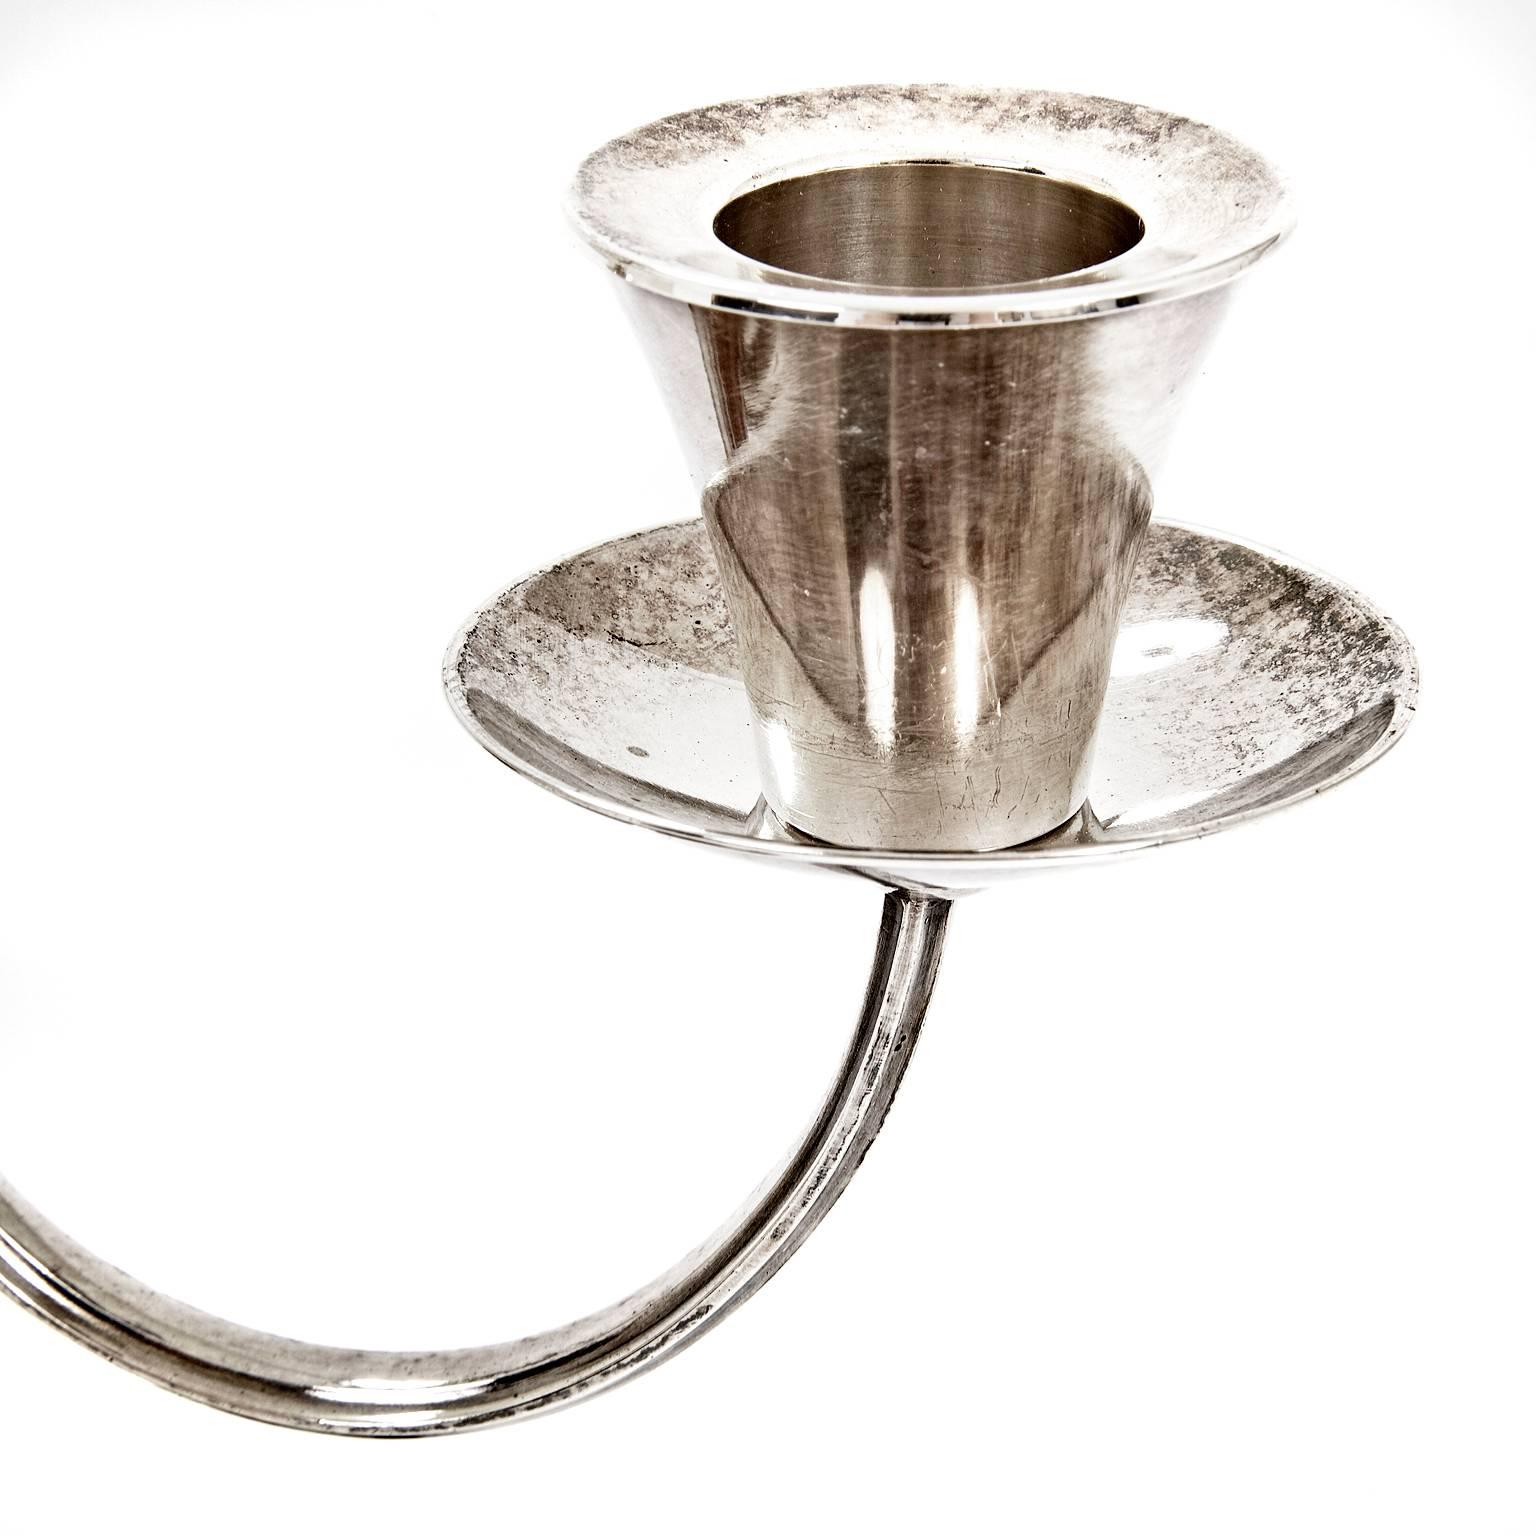 A stunning Art Deco candleholder on a round base with a fluted shaft made of wood and two arms made of silver. A marking on the foot reads 